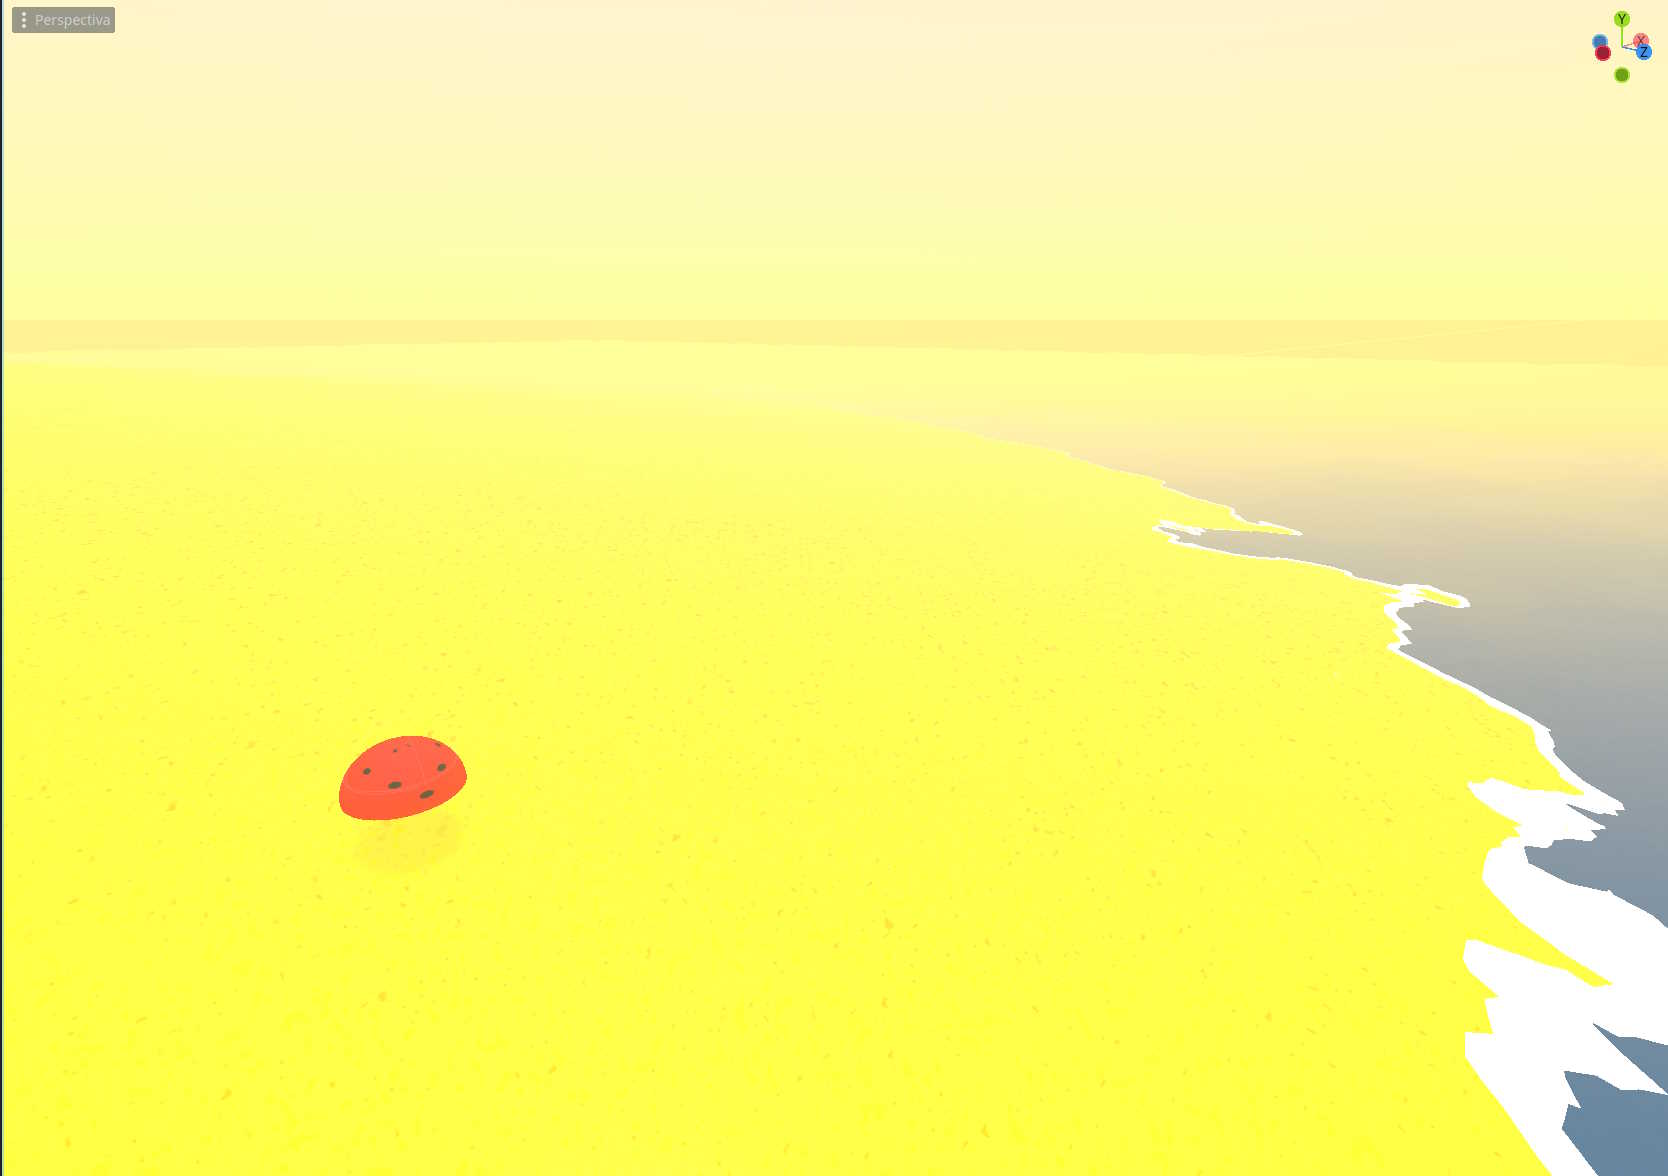 Screenshot of Godot Engine showing a basic 3D island, with water and a small simple ladybug.